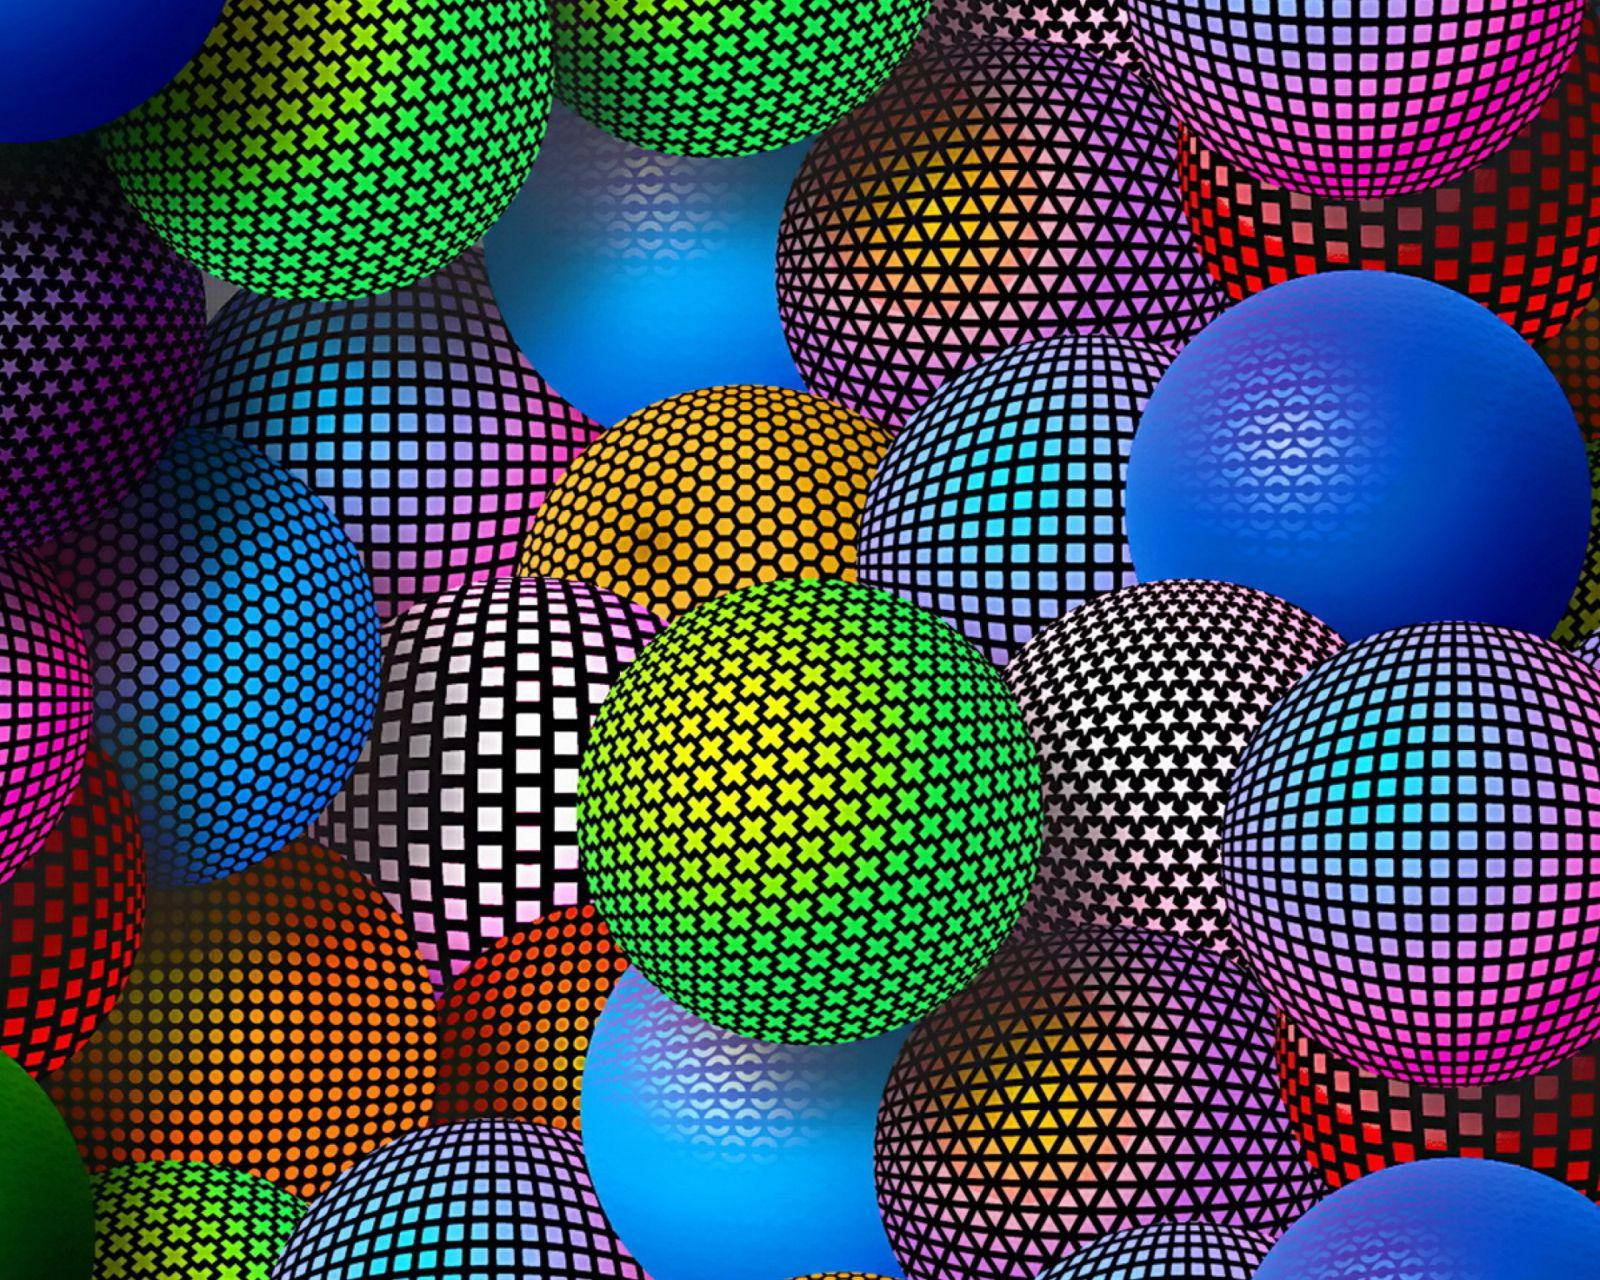 Colourful Spheres Samsung Galaxy Tablet Picture